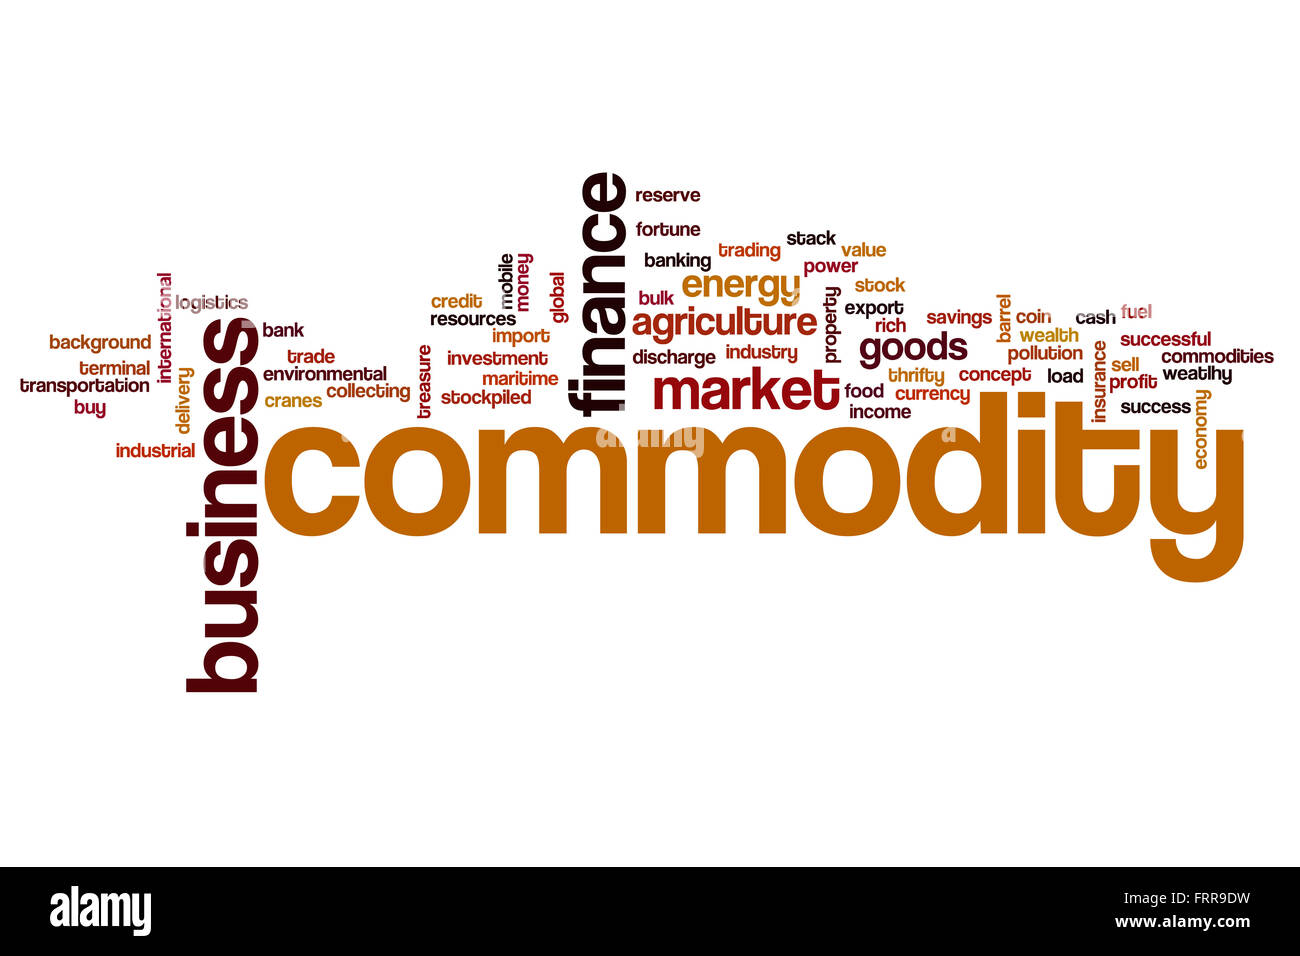 Commodity word cloud concept Stock Photo